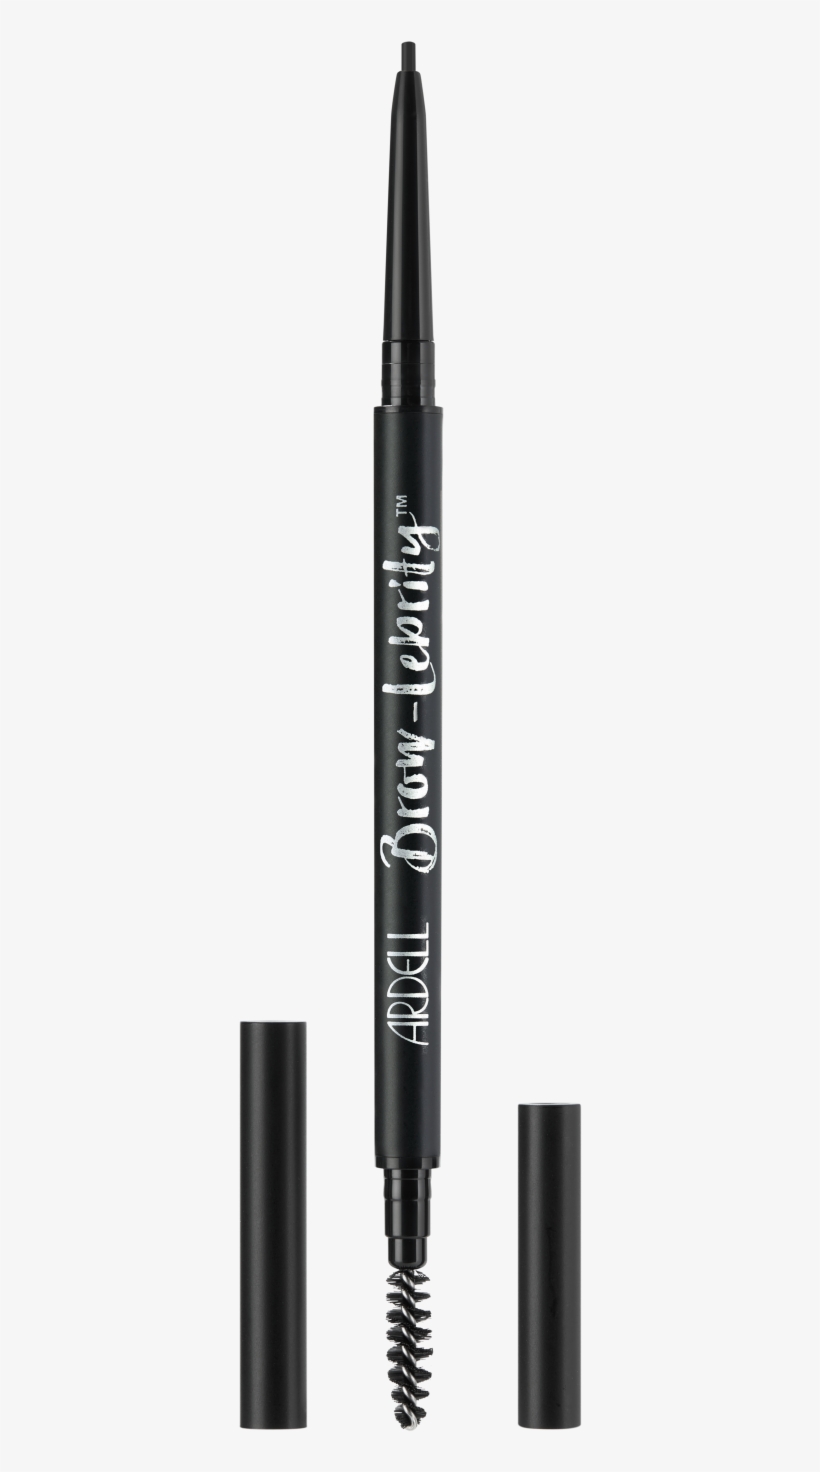 Soft Black Brow Lebrity Micro Brow Pencil By Ardell - Ardell Brow-lebrity Micro Brow Pencil, transparent png #7626558